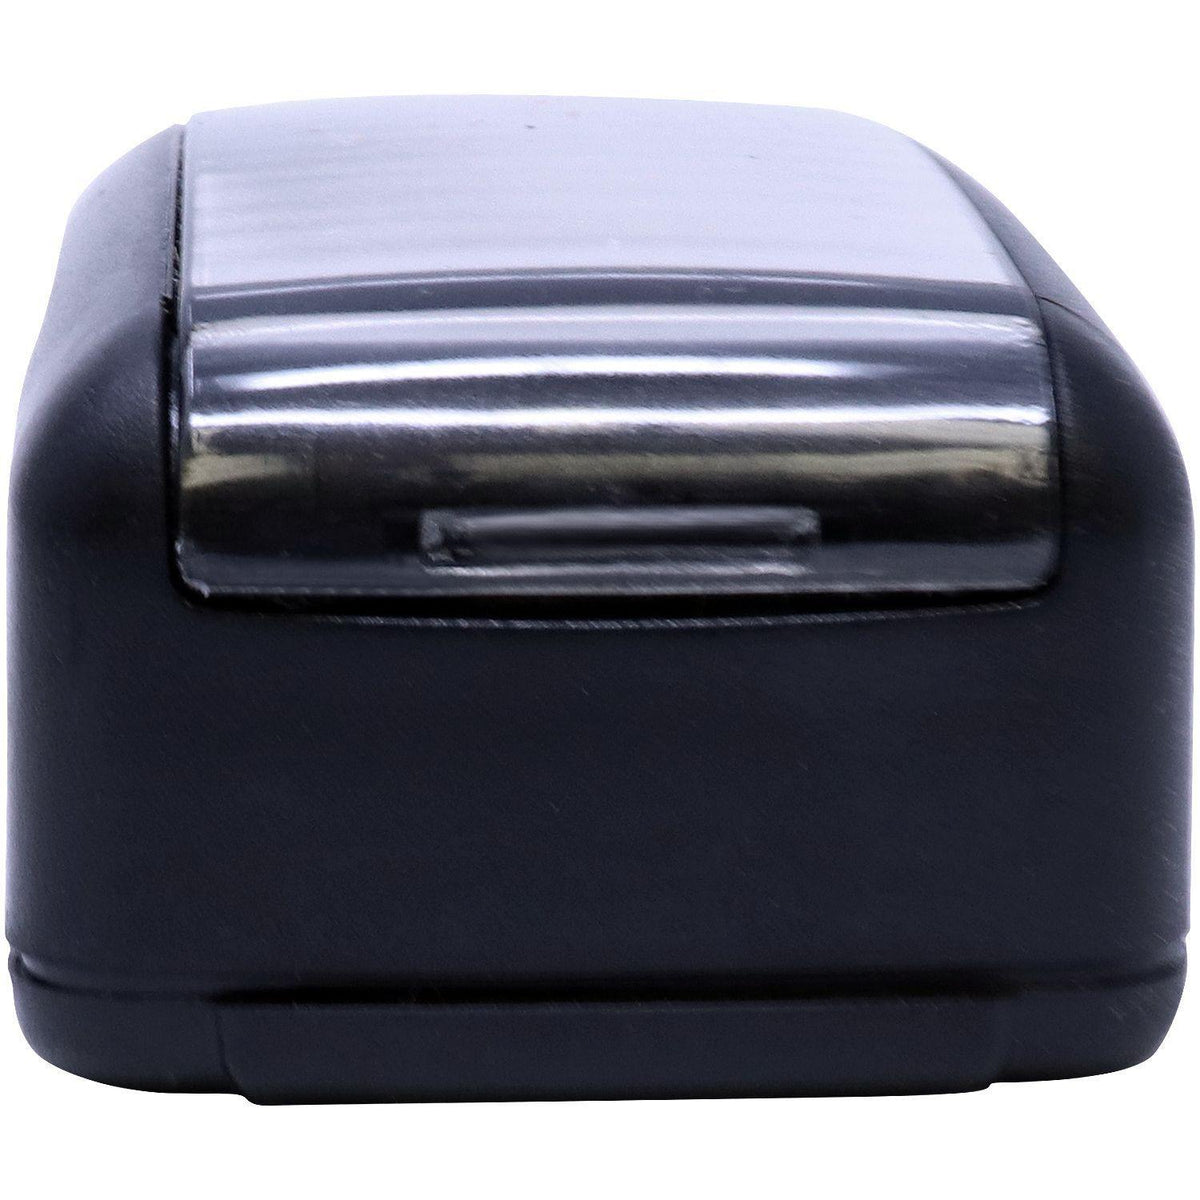 Large Pre Inked Parent Signature Required Stamp Side View